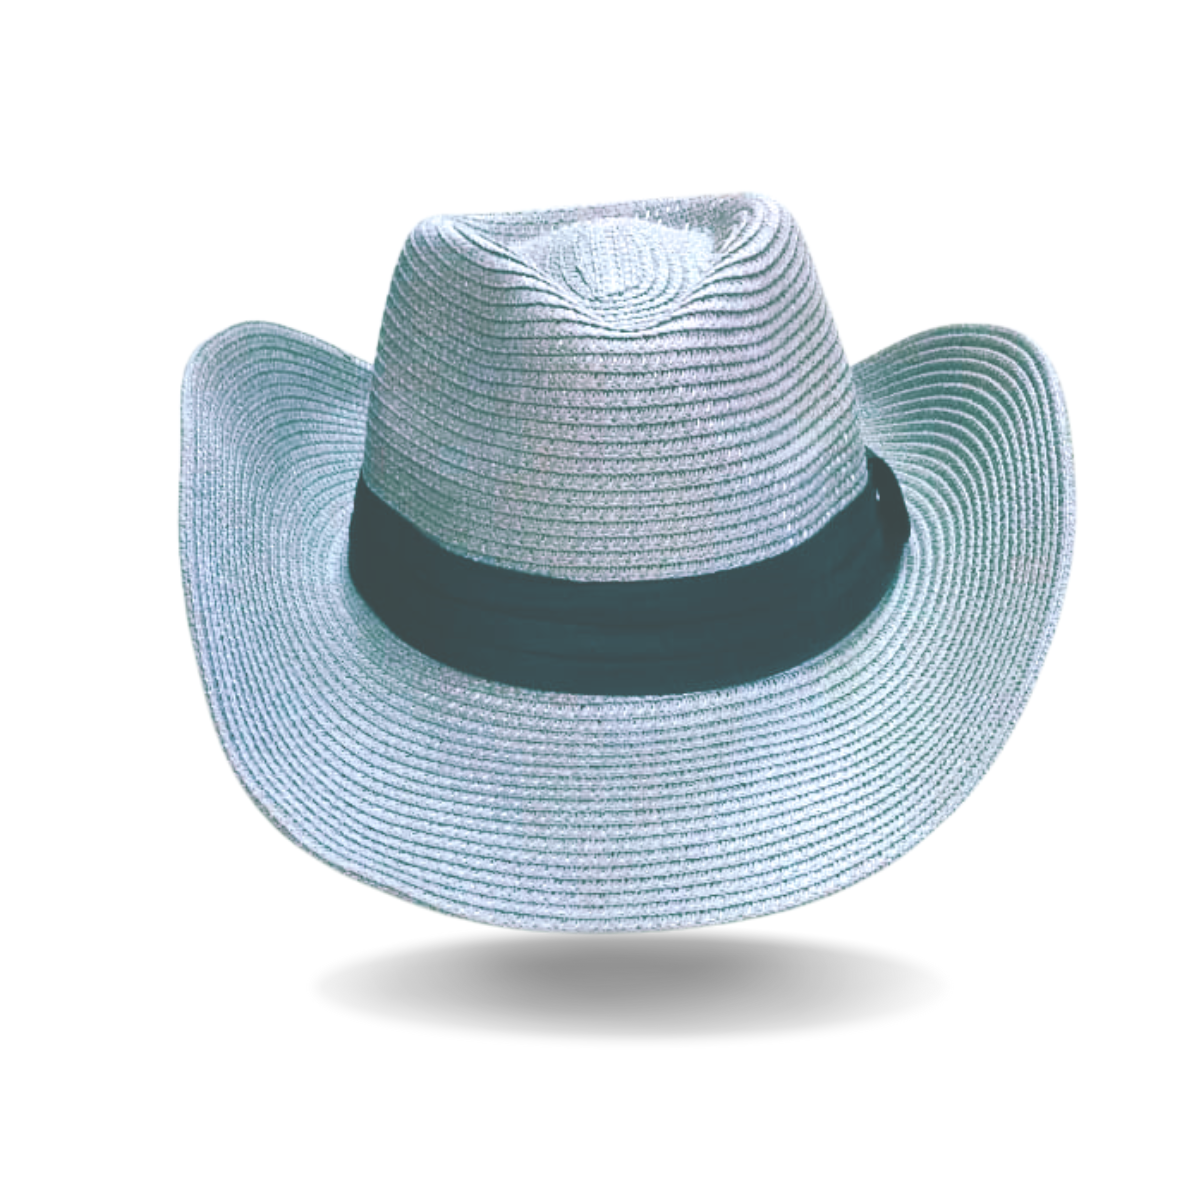 GolfBasic Men's Straw Hat with Band